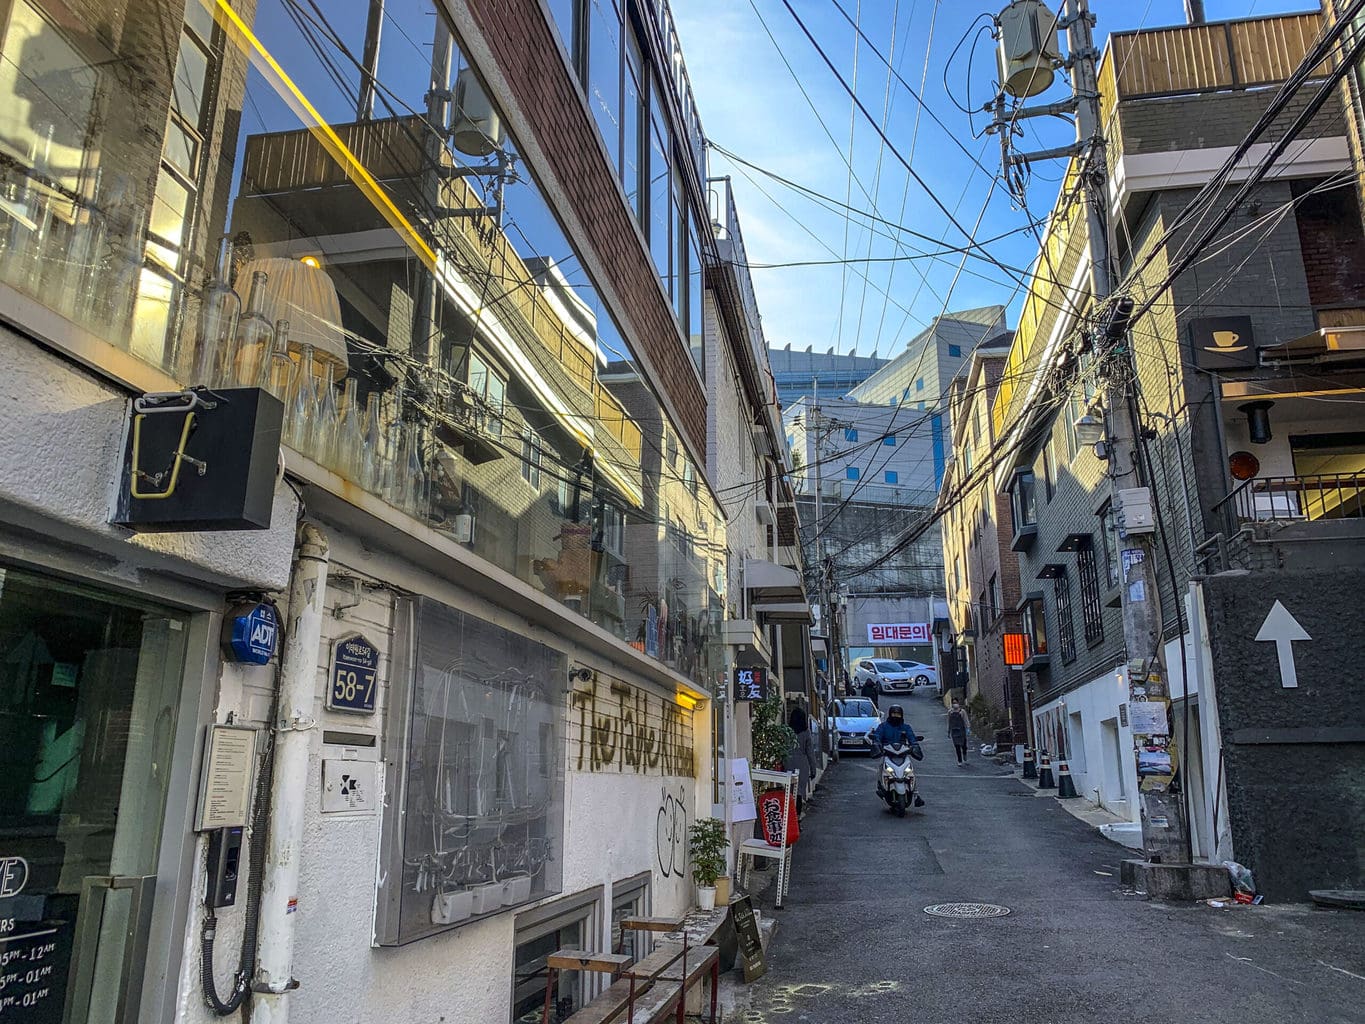 The back roads of Hannam-dong